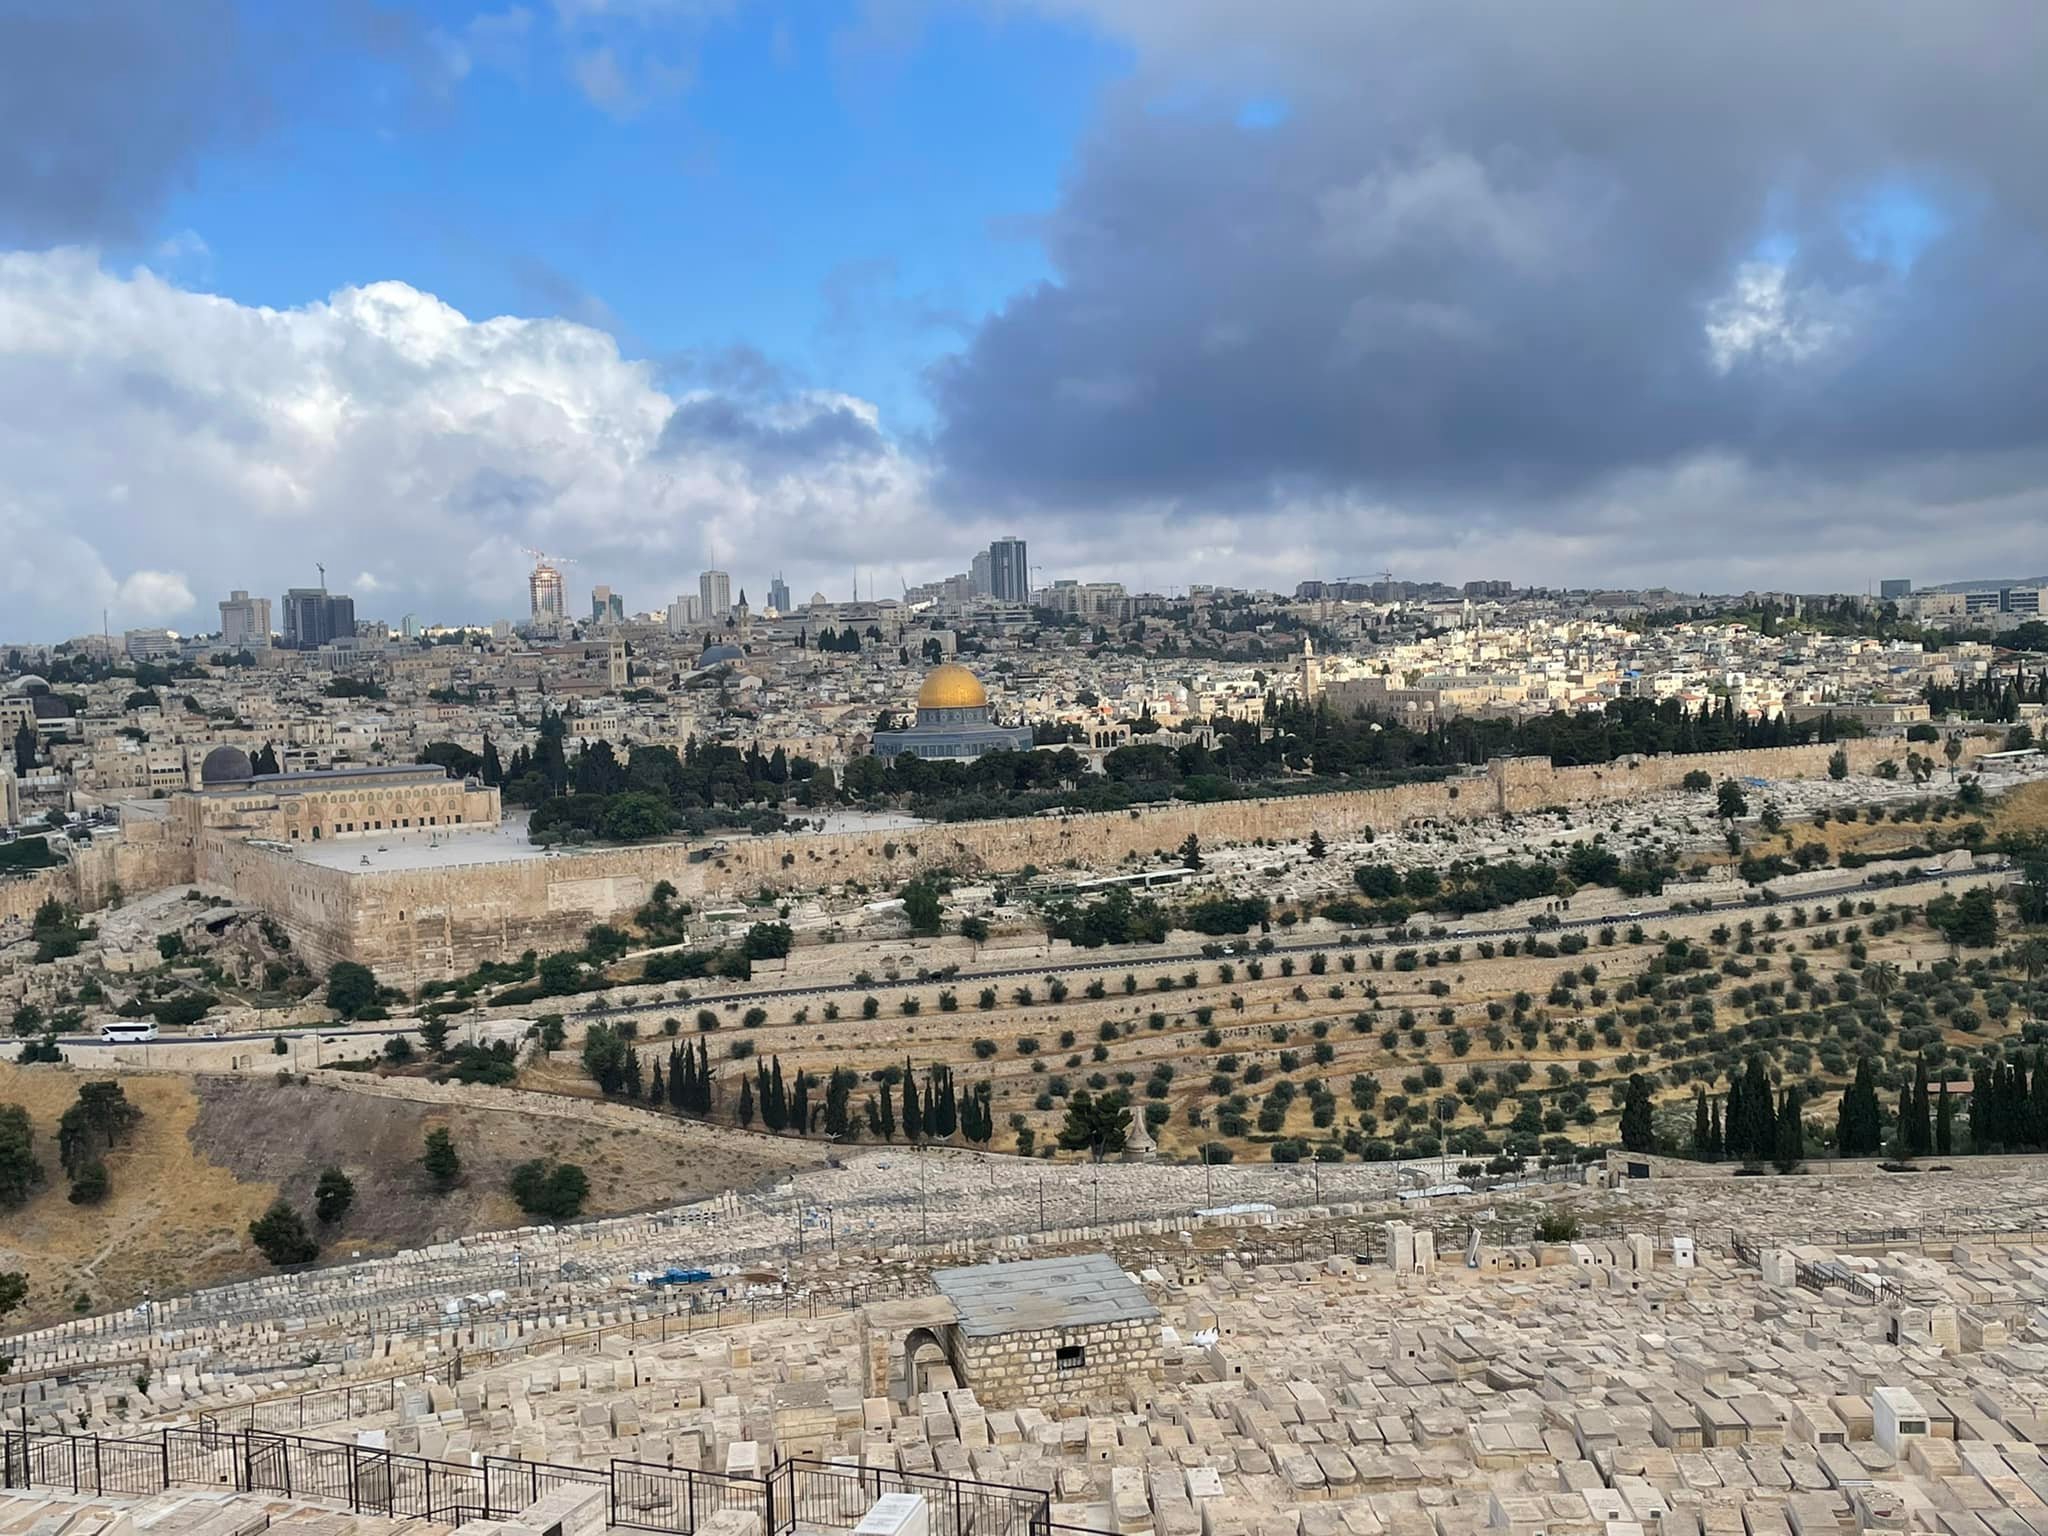  The Mount of Olives is largely a cemetery, and was in Jesus’ time as well. 